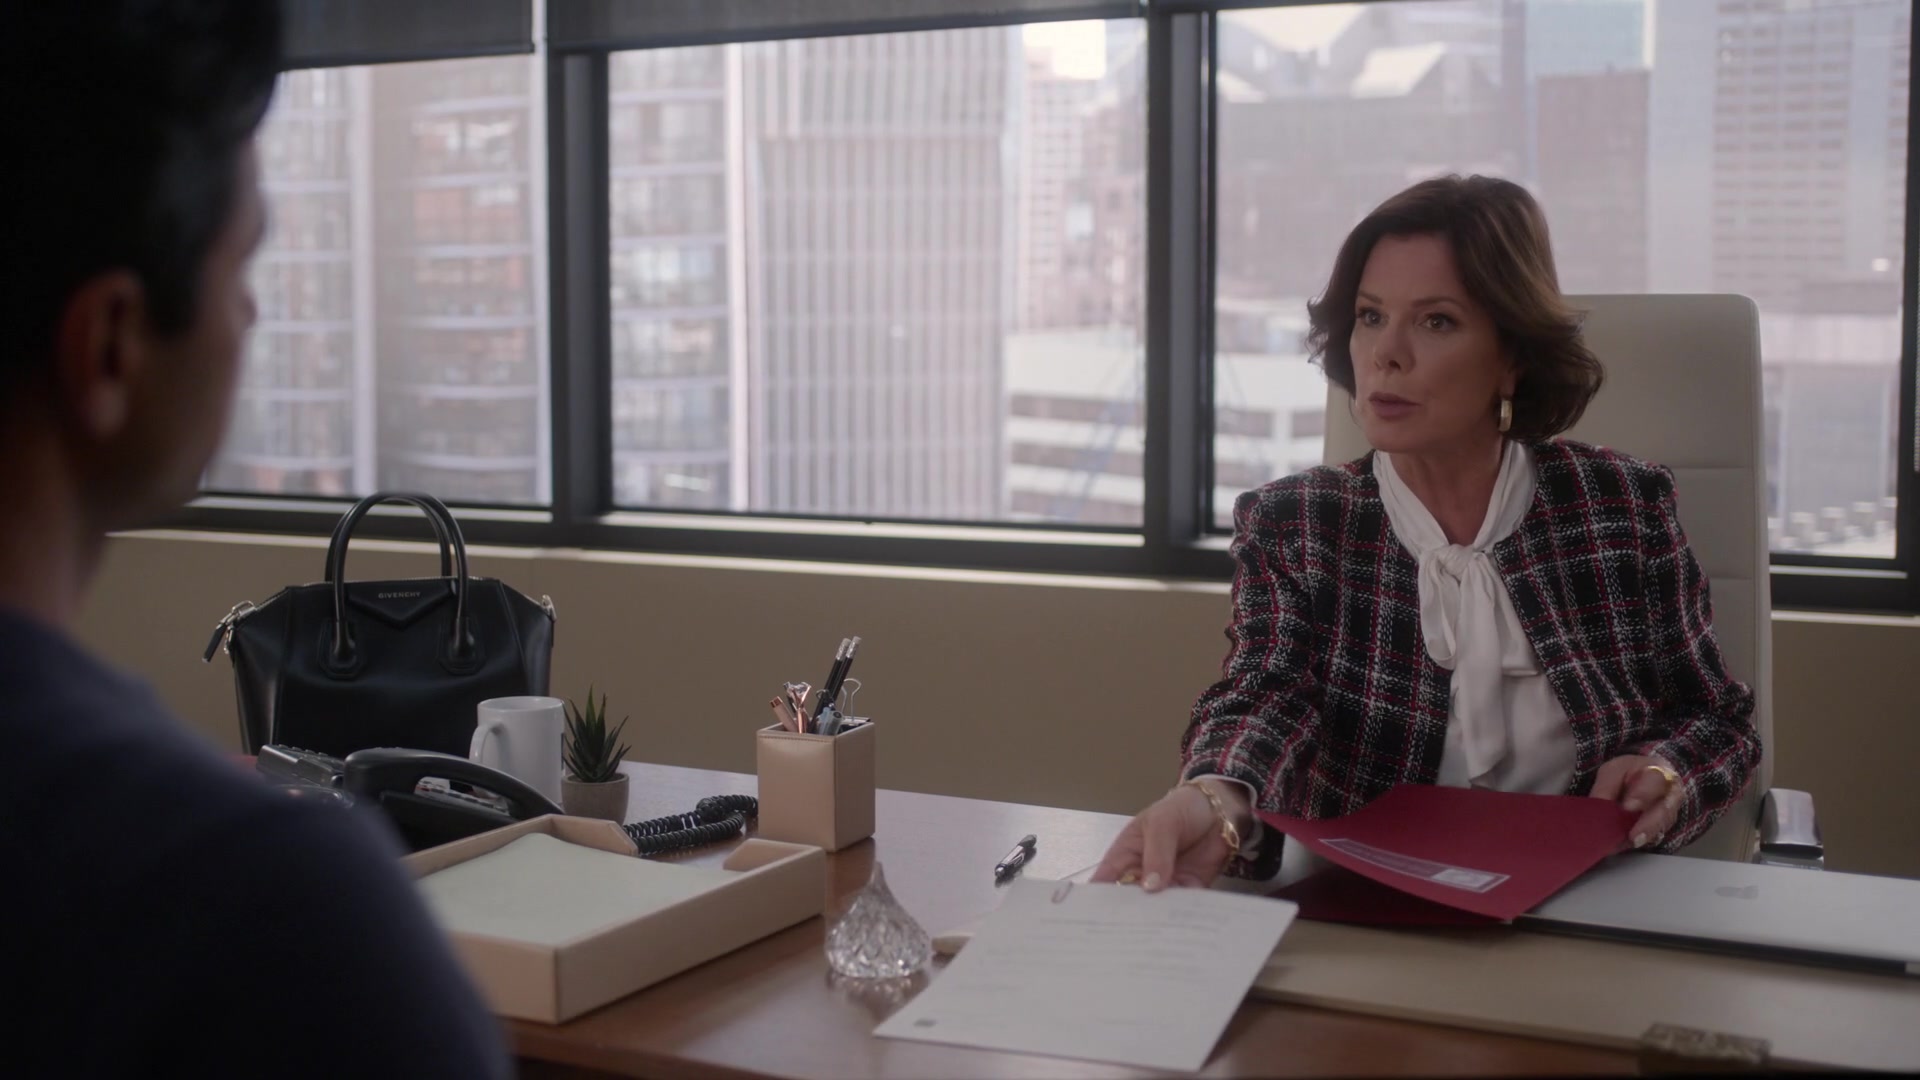 Strathberry The Strathberry Midi Tote worn by Margaret (Marcia Gay Harden)  as seen in So Help Me Todd (S01E12)